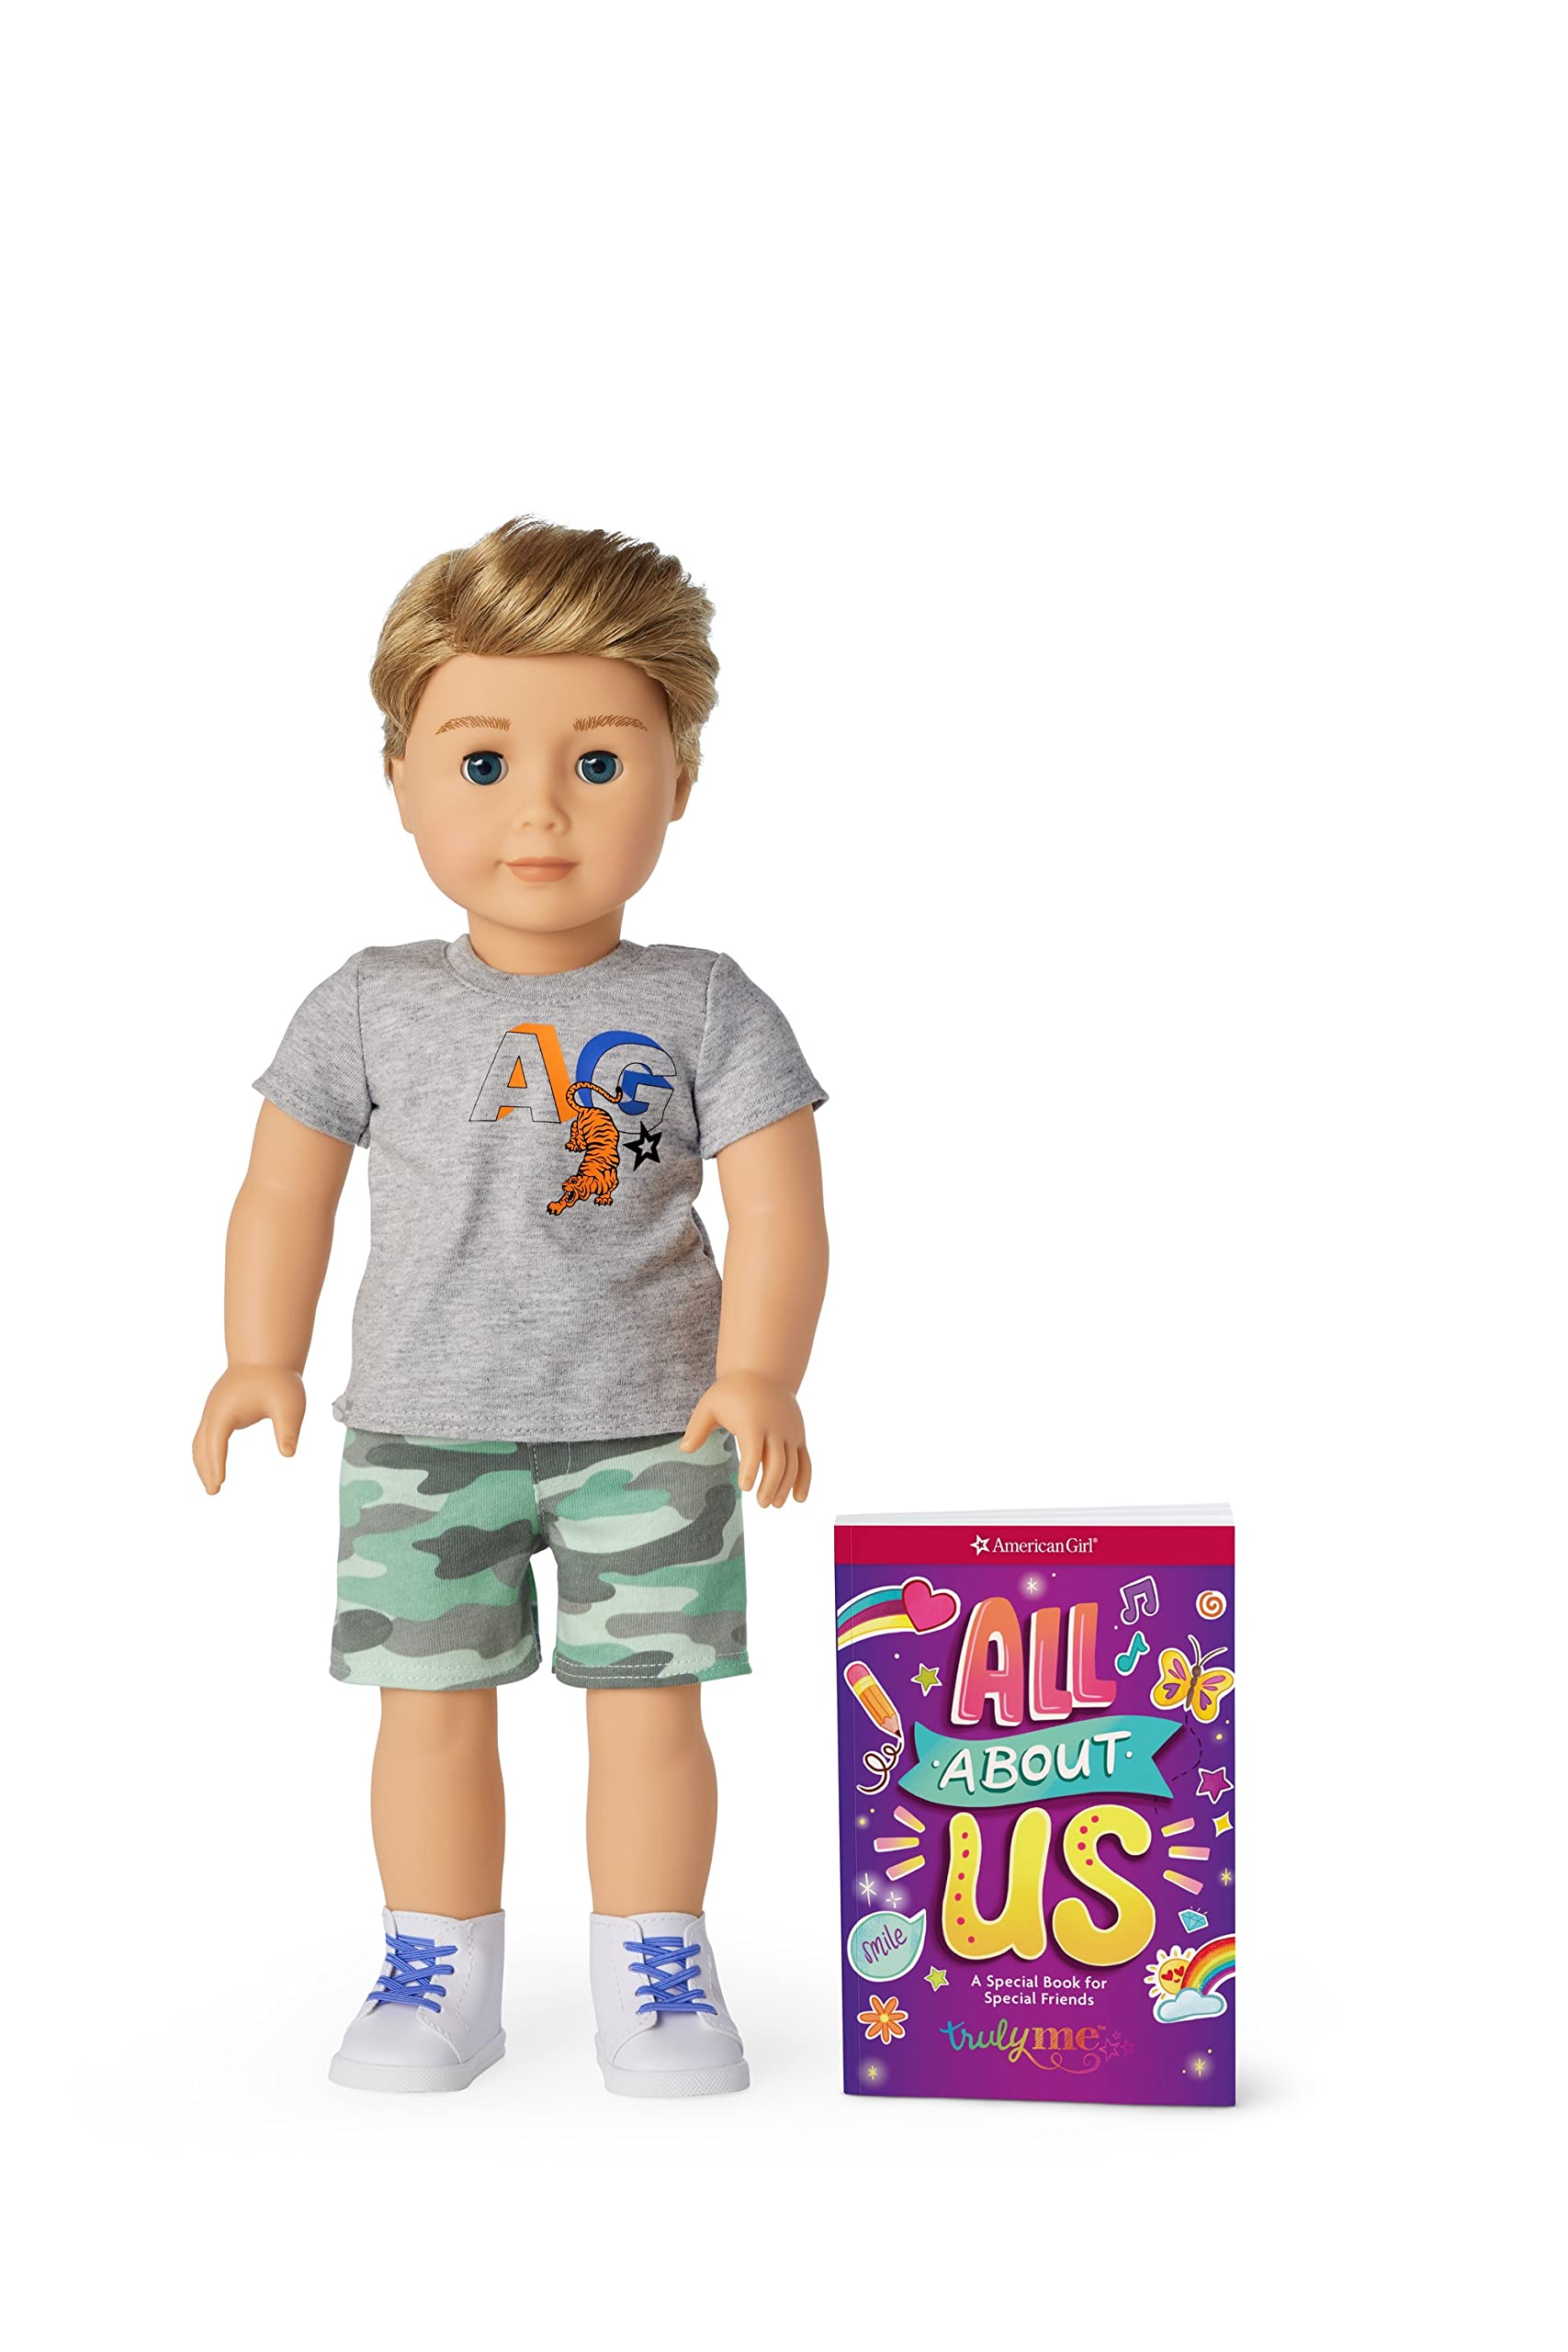 American Girl Truly Me 18-Inch Doll 104 with Dark-Blue Eyes, Straight Caramel Hair, Light Skin with Warm Olive Undertones, Camo Shorts and Grey T-Shirt